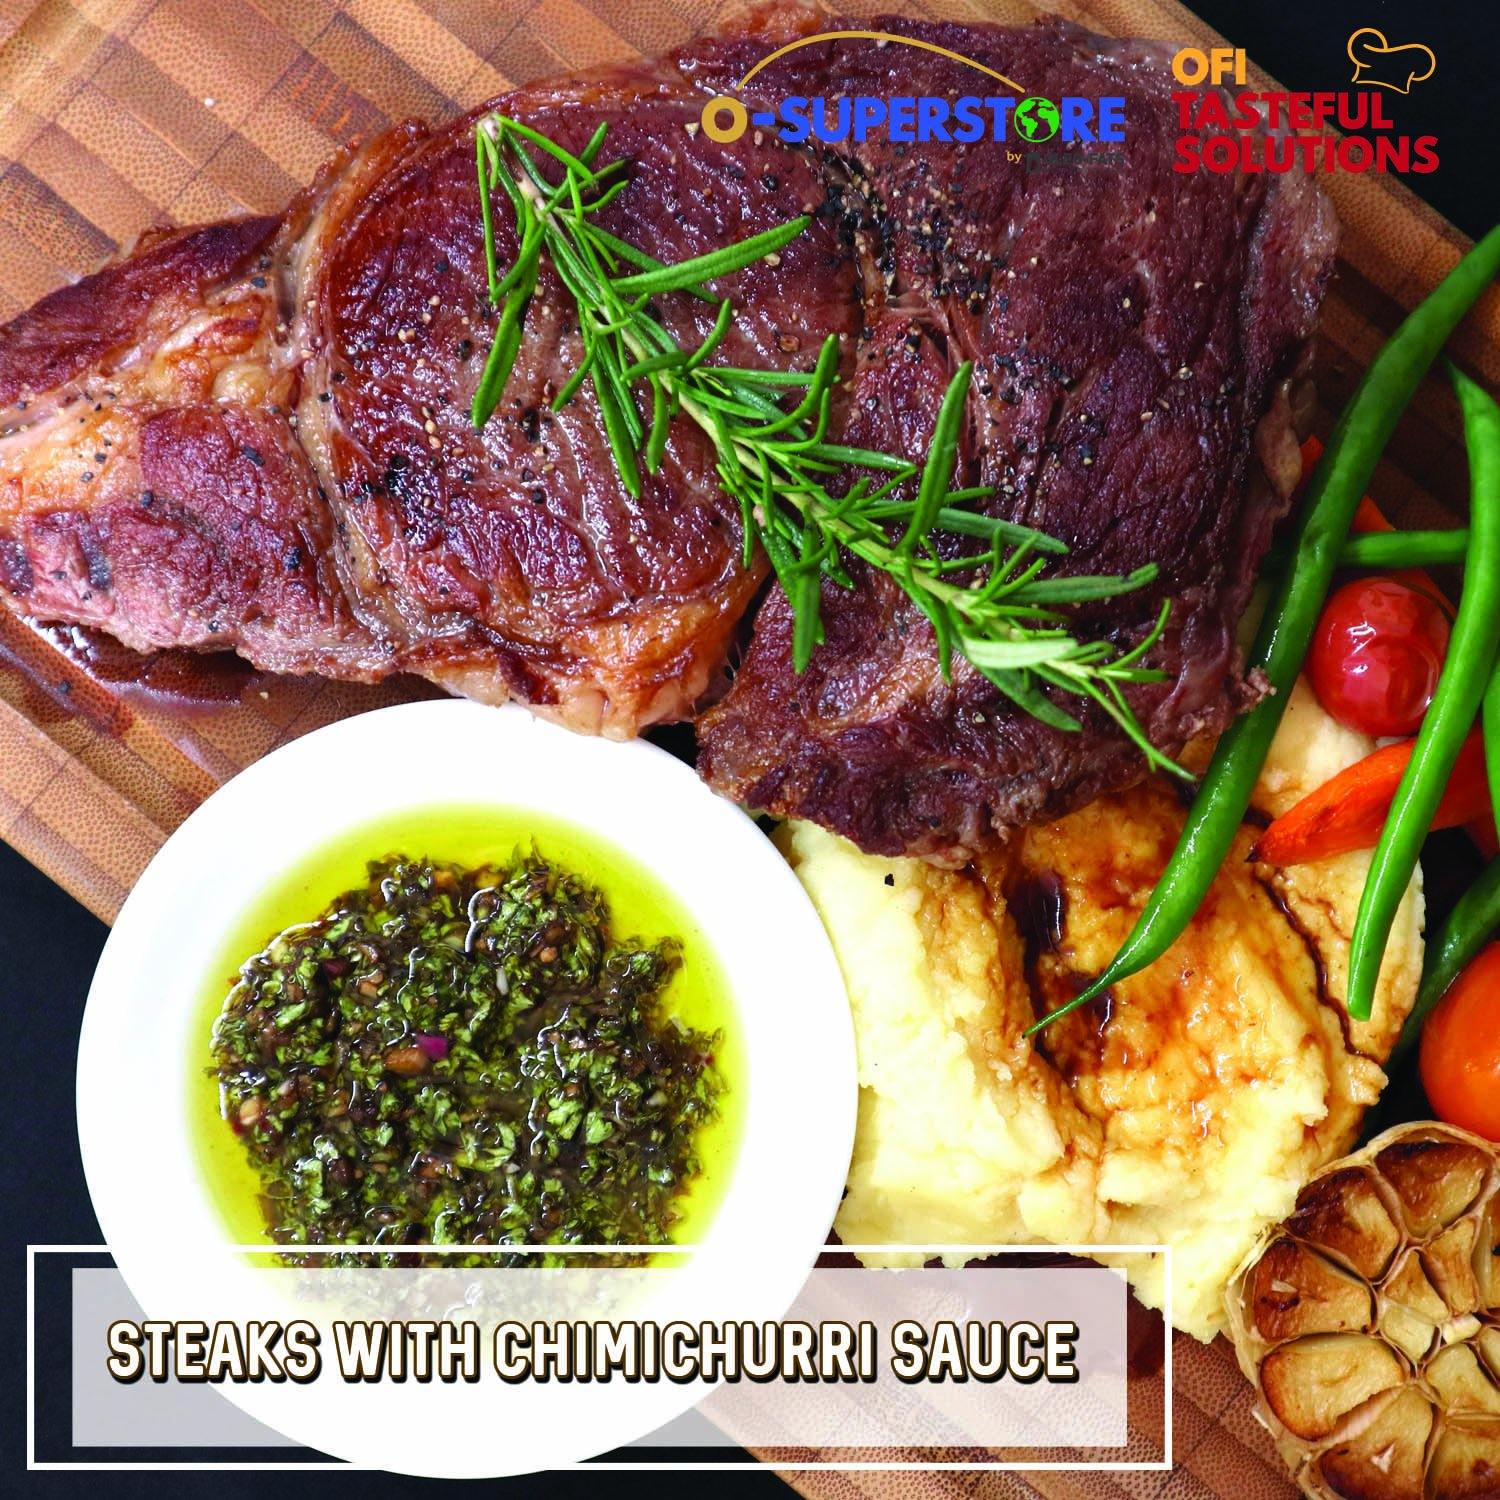 Steaks with Chimichurri Sauce - O-SUPERSTORE